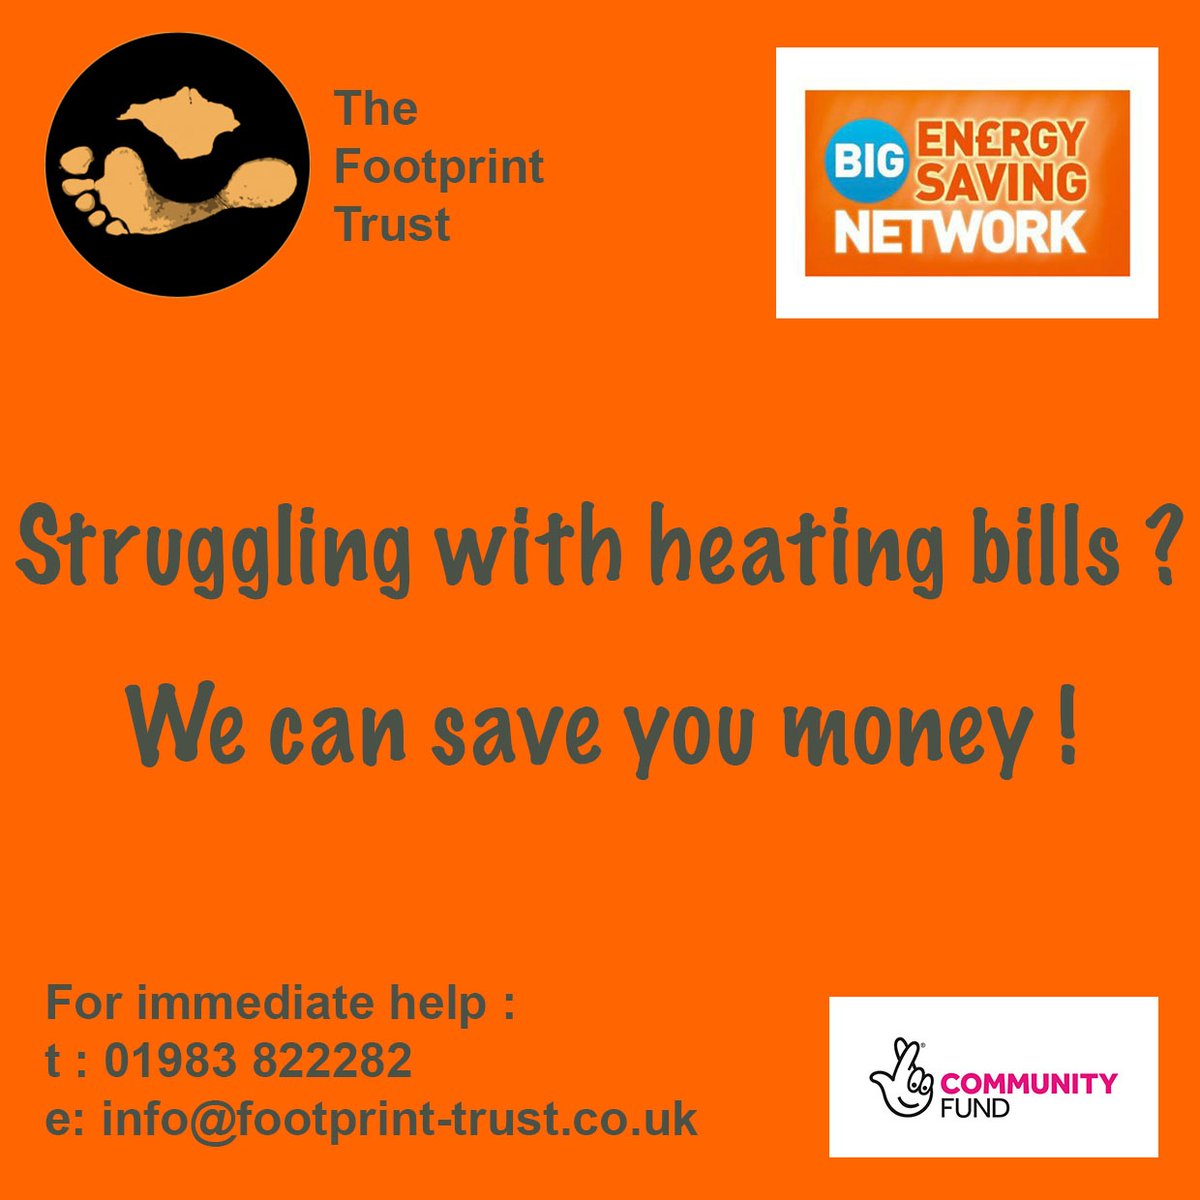 This coming week we will be at :

Ryde Foodbank Tuesday am 10:00 - 12:00
Ryde Library Tuesday pm 1pm - 2:30pm

Cowes Foodbank Friday am 10:00 - 12:00

#fuelpoverty #heatingoreating #isleofwight #islandlife #broke #heating #moneysaving #energysaving